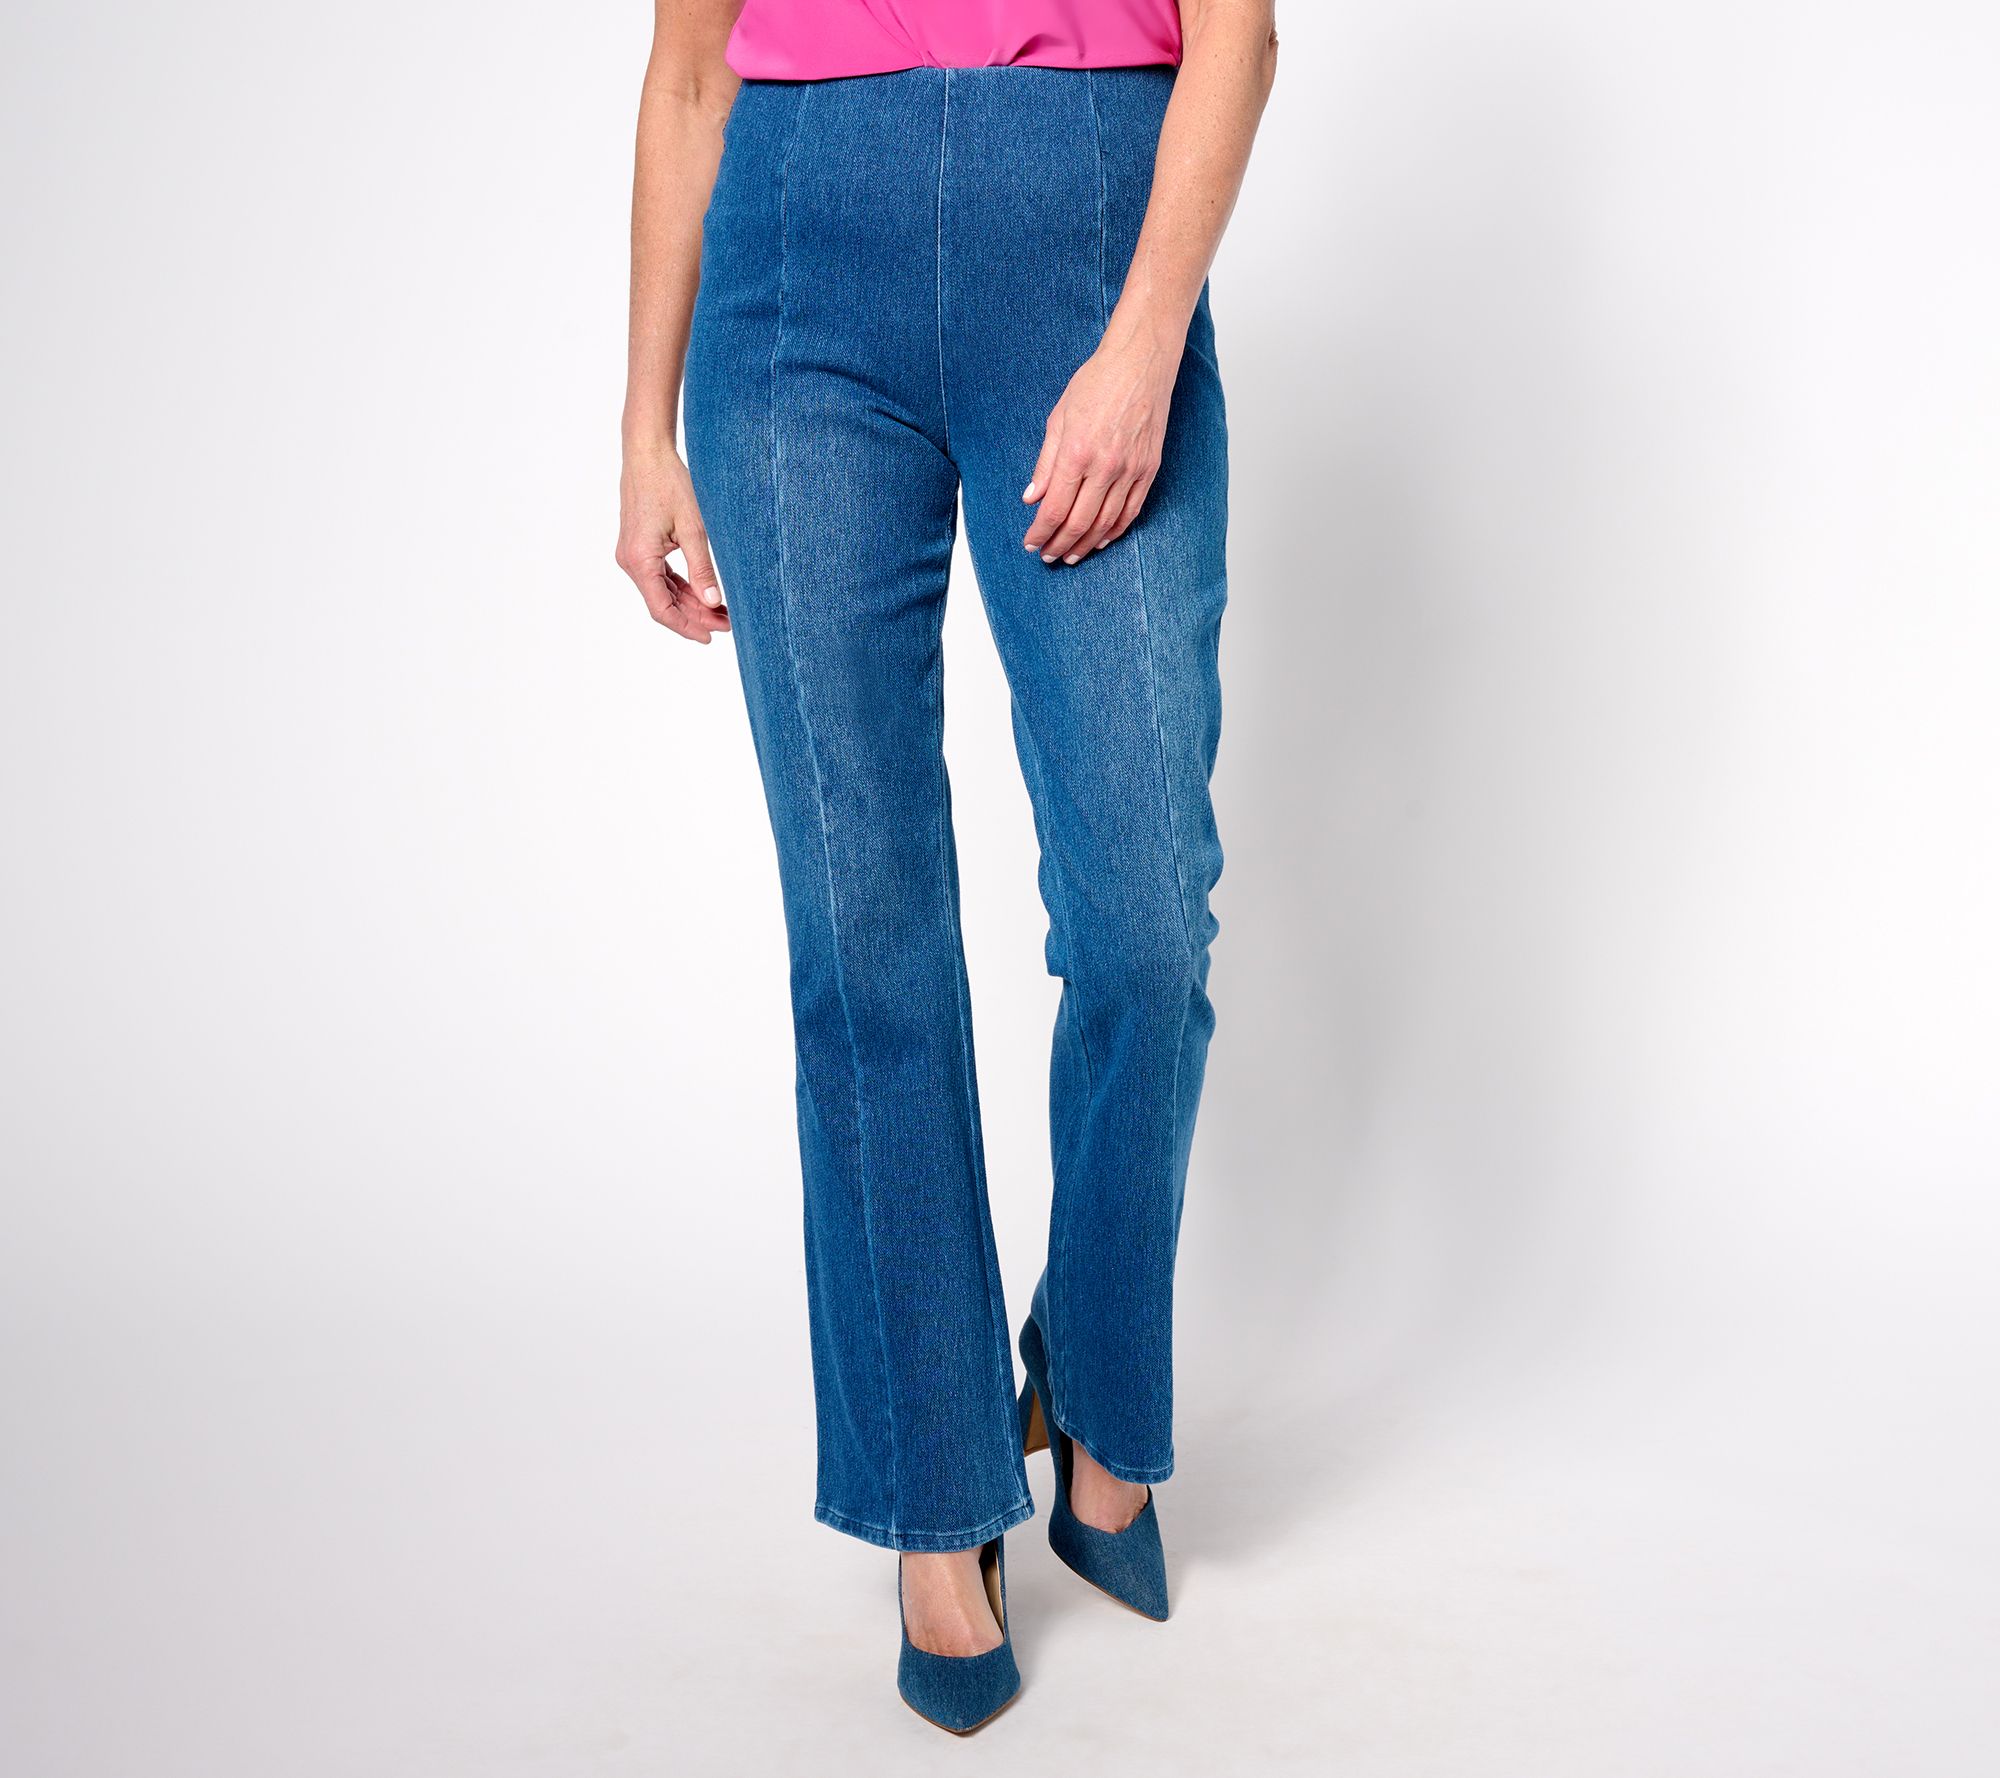 Women with Control Elite Prime Stretch Denim Seamed Pant on QVC